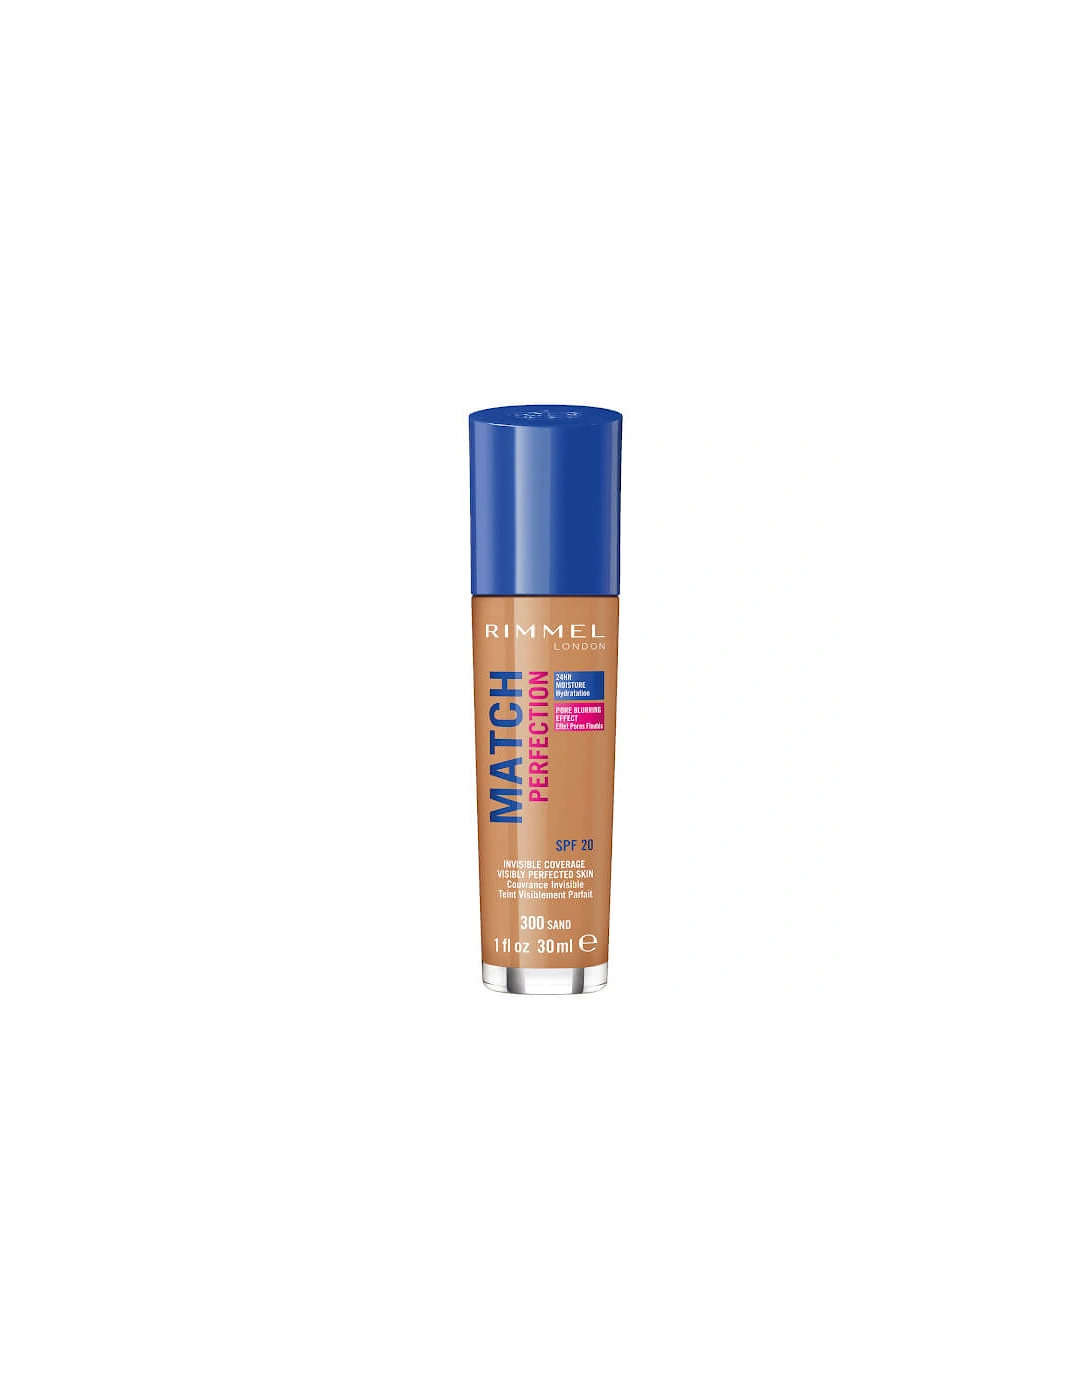 London SPF 20 Match Perfection Foundation 30ml (Various Shades), 2 of 1